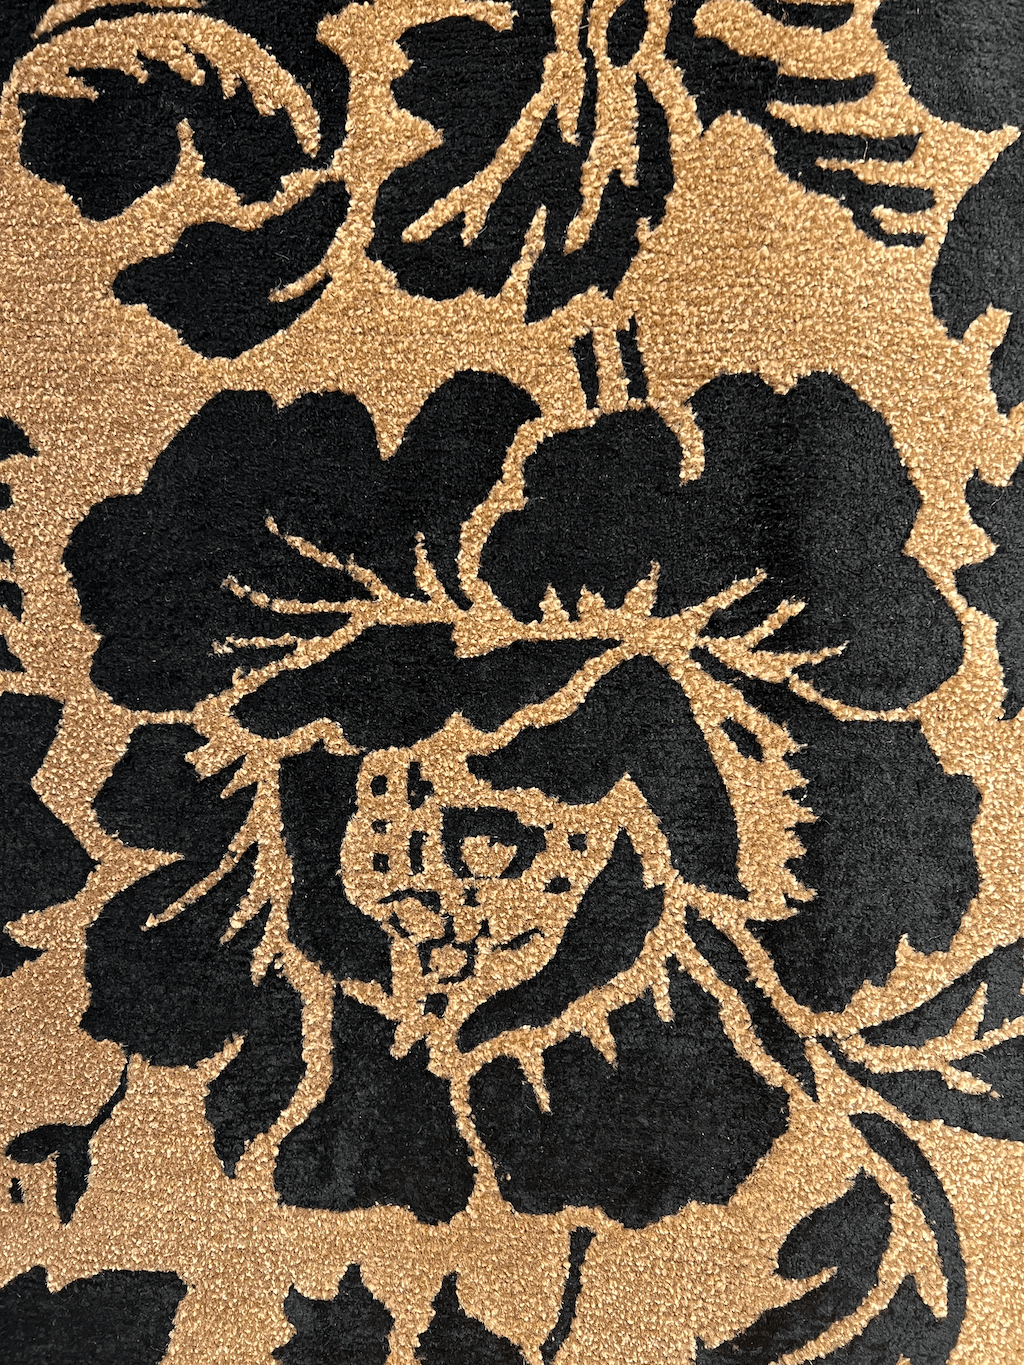 Indian Modern Wool And Silk Hand-Knotted Brown Black Area Rug product image #27556281090218